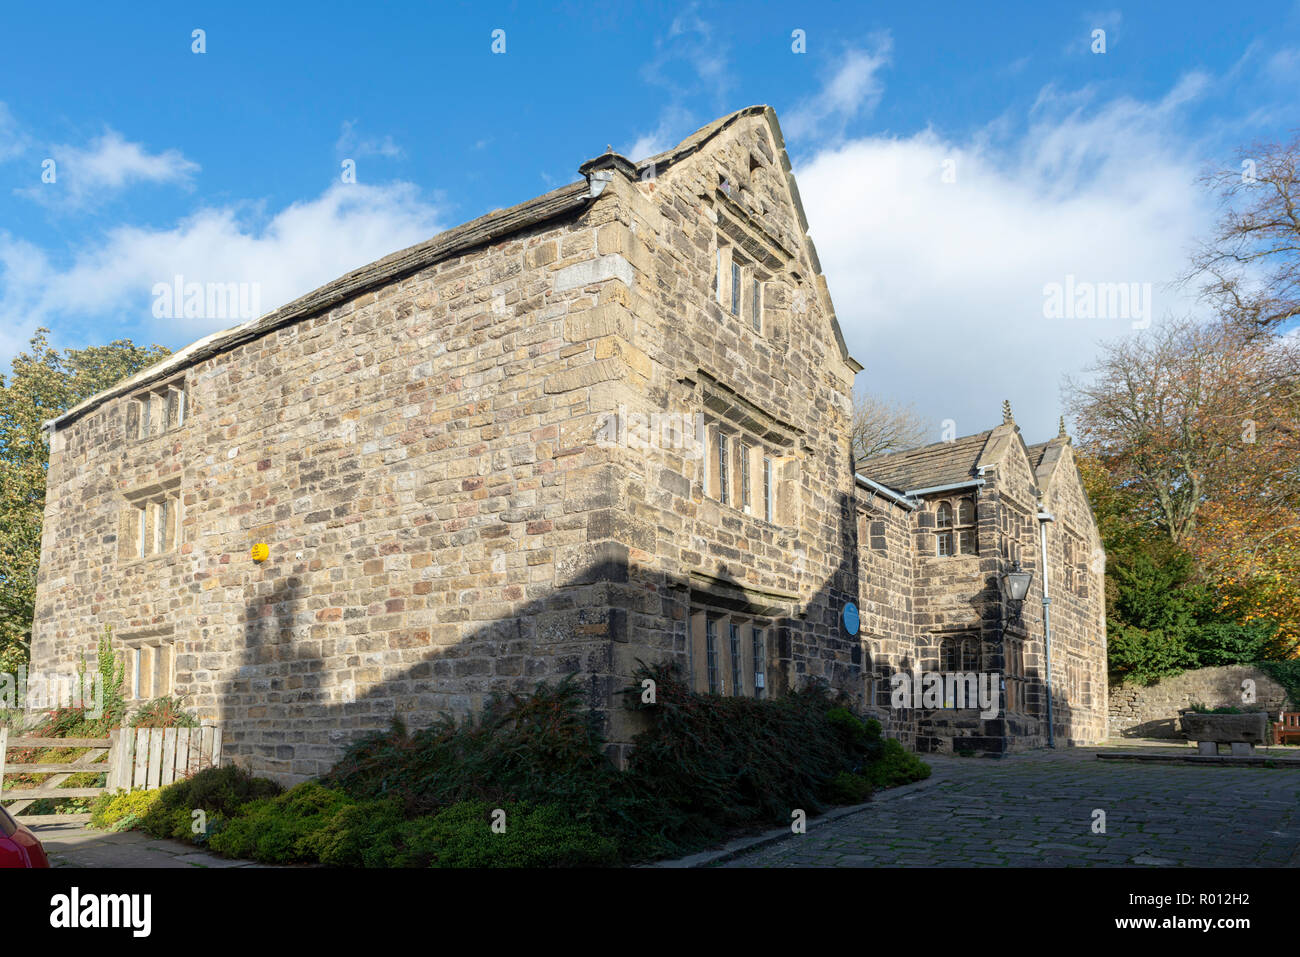 Illkey Manor House A Rare Surviving Stone Built Medieval Manor House Now The Museum And Art Gallery For This Busy Yorkshire Town Stock Photo Alamy